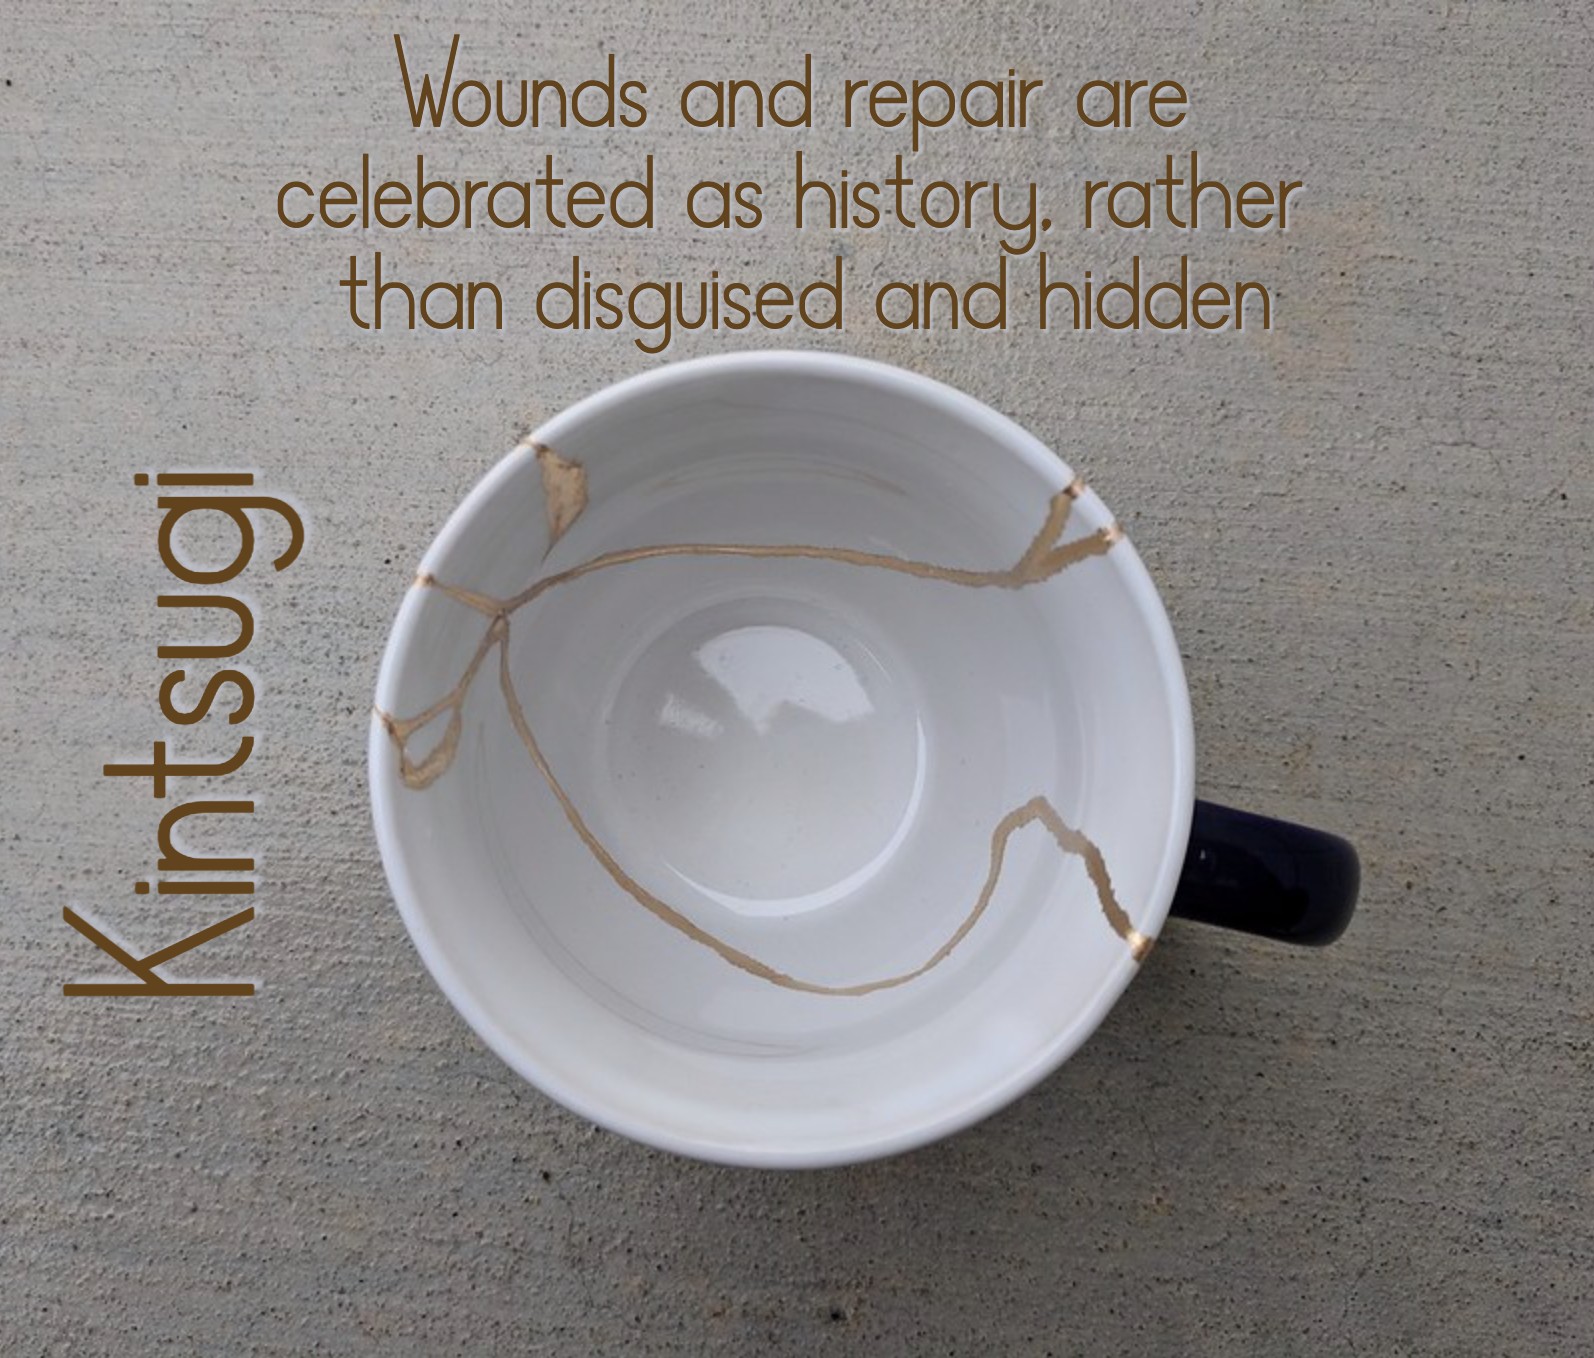 Kintsugi: Wounds and repair are celebrated as history rather than disguised or hidden